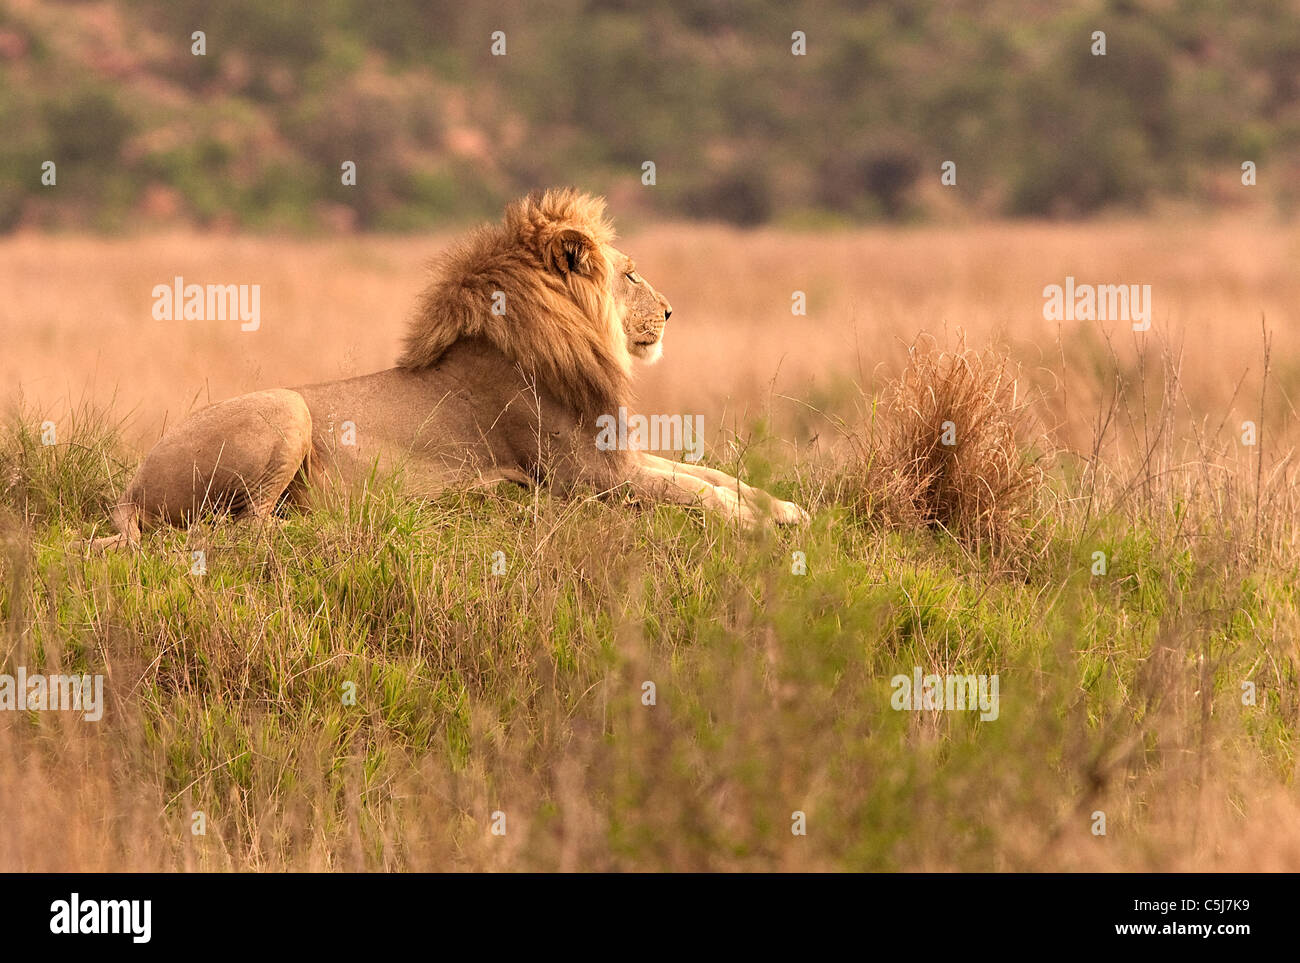 lion in Welgevonden game reserve, South africa Stock Photo